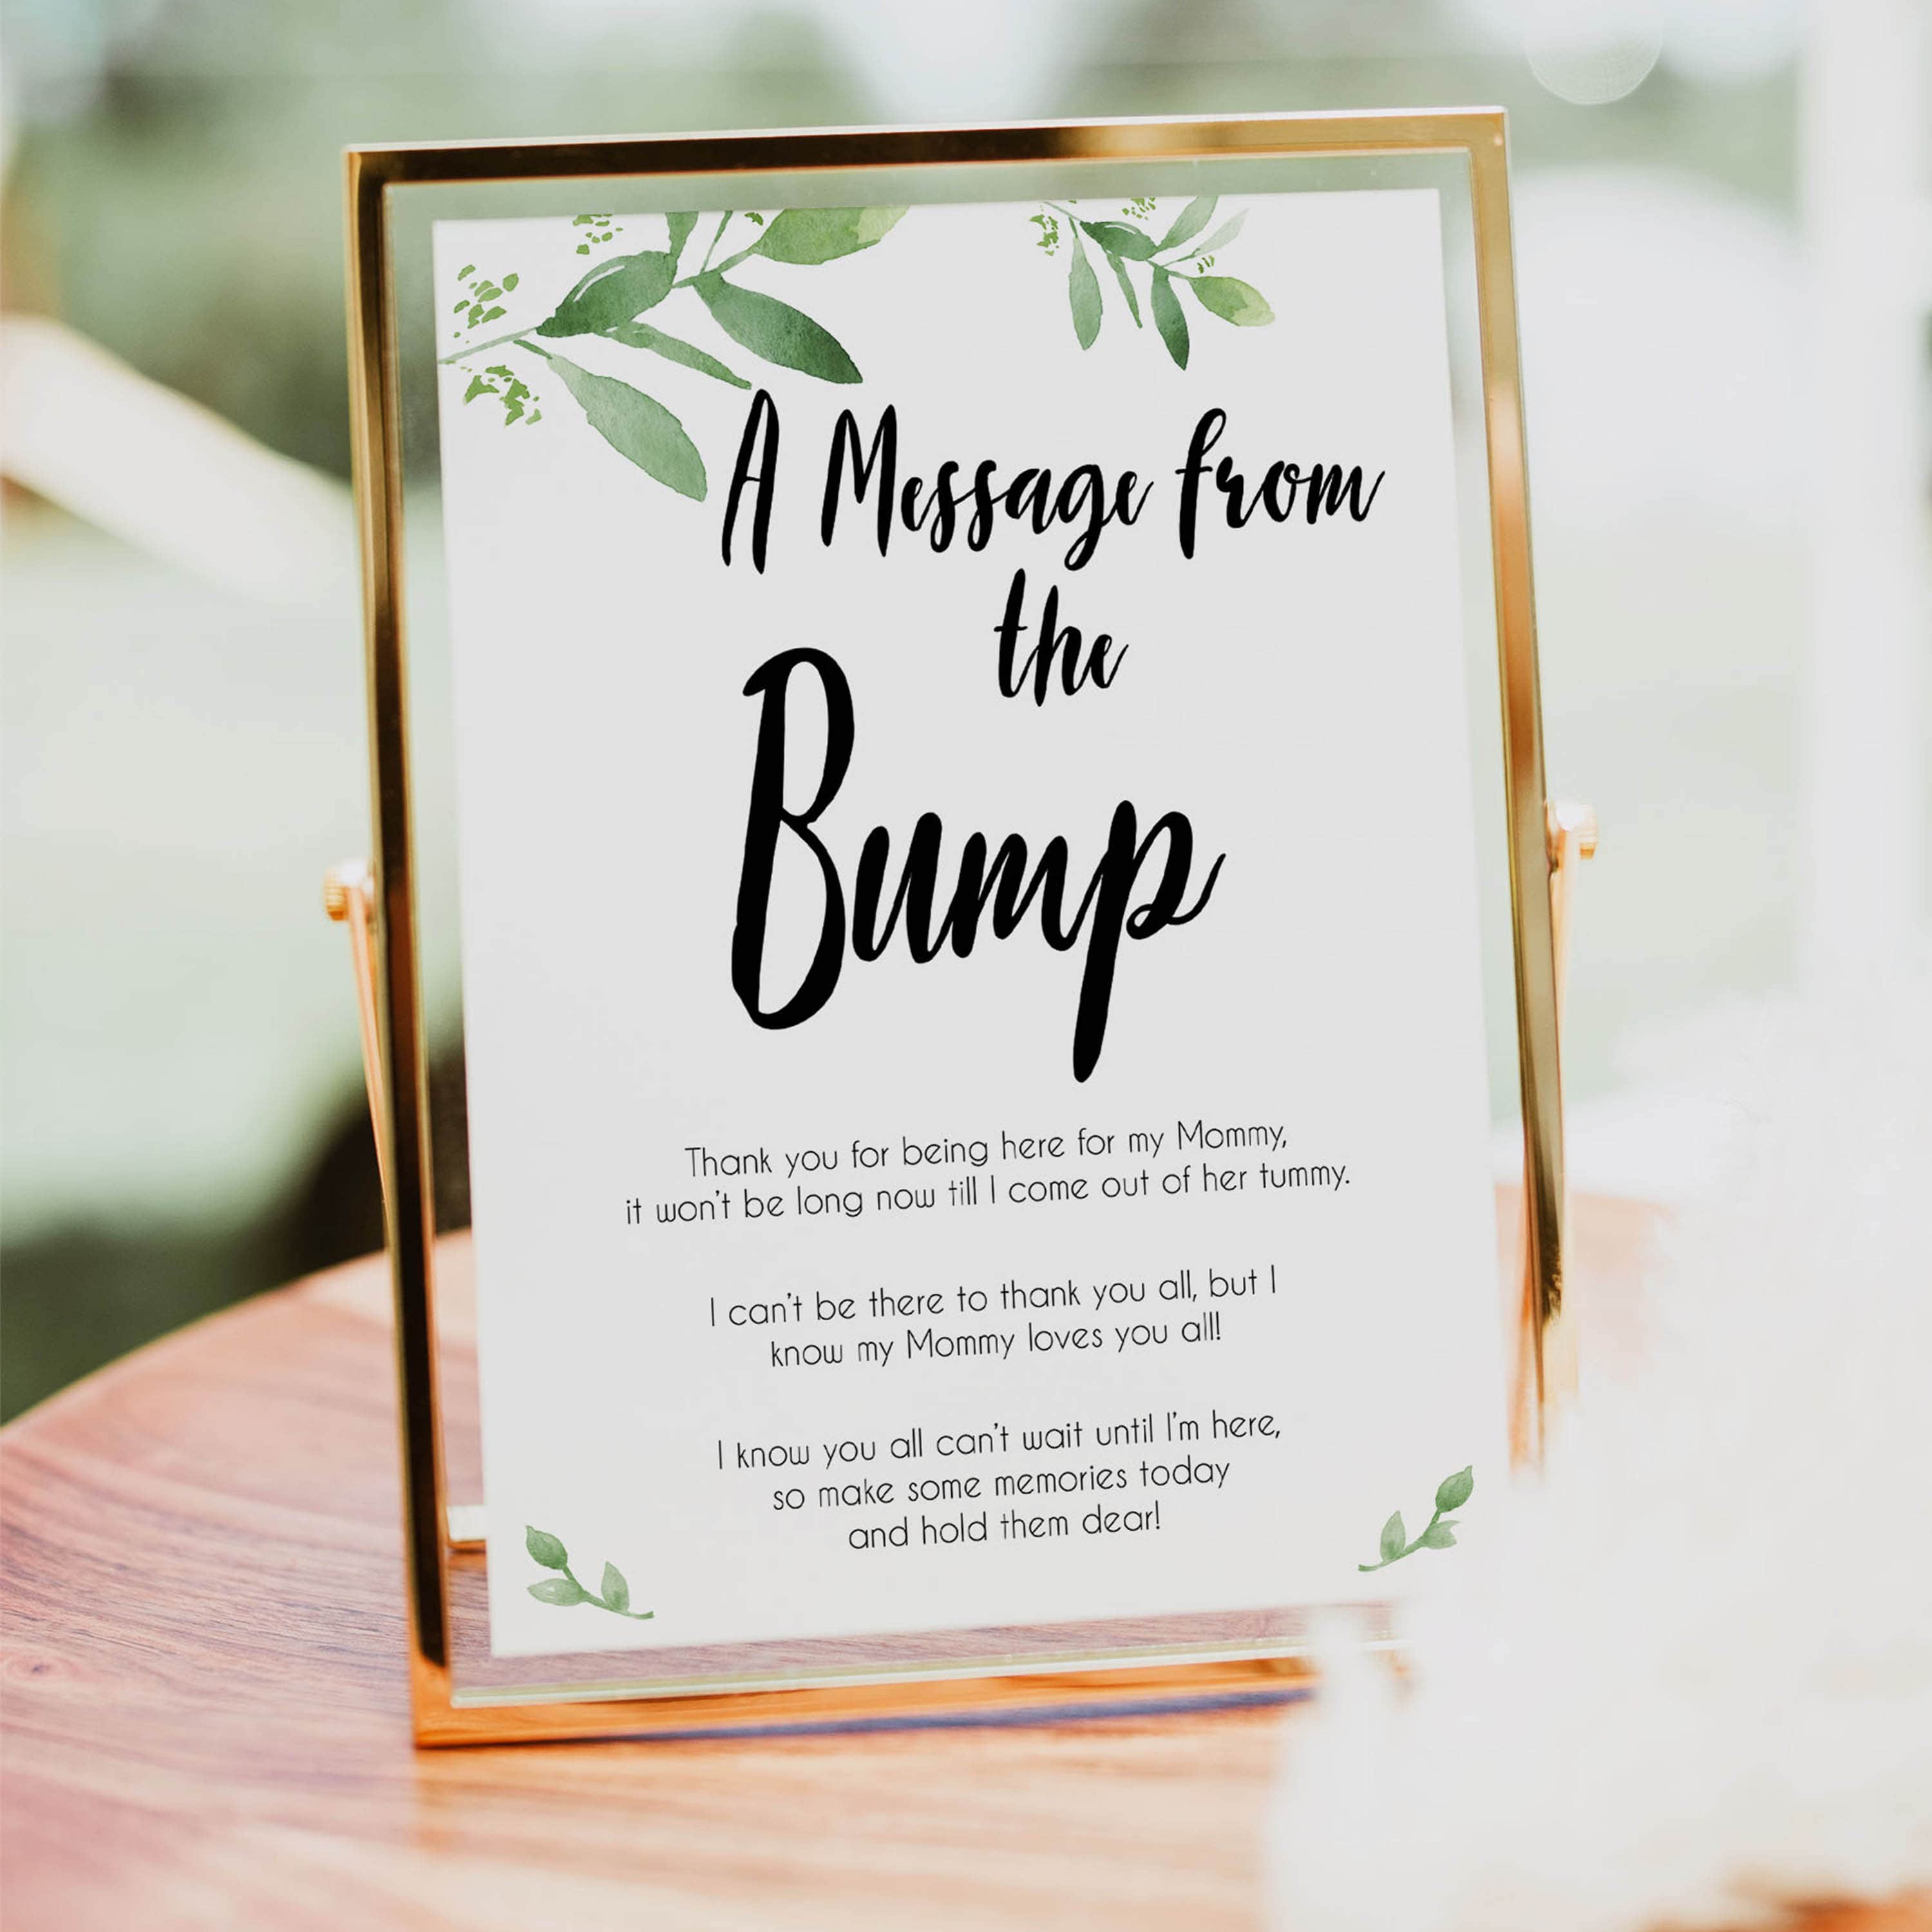 botanical message from bump baby shower sign, printable baby shower games, fun baby shower games